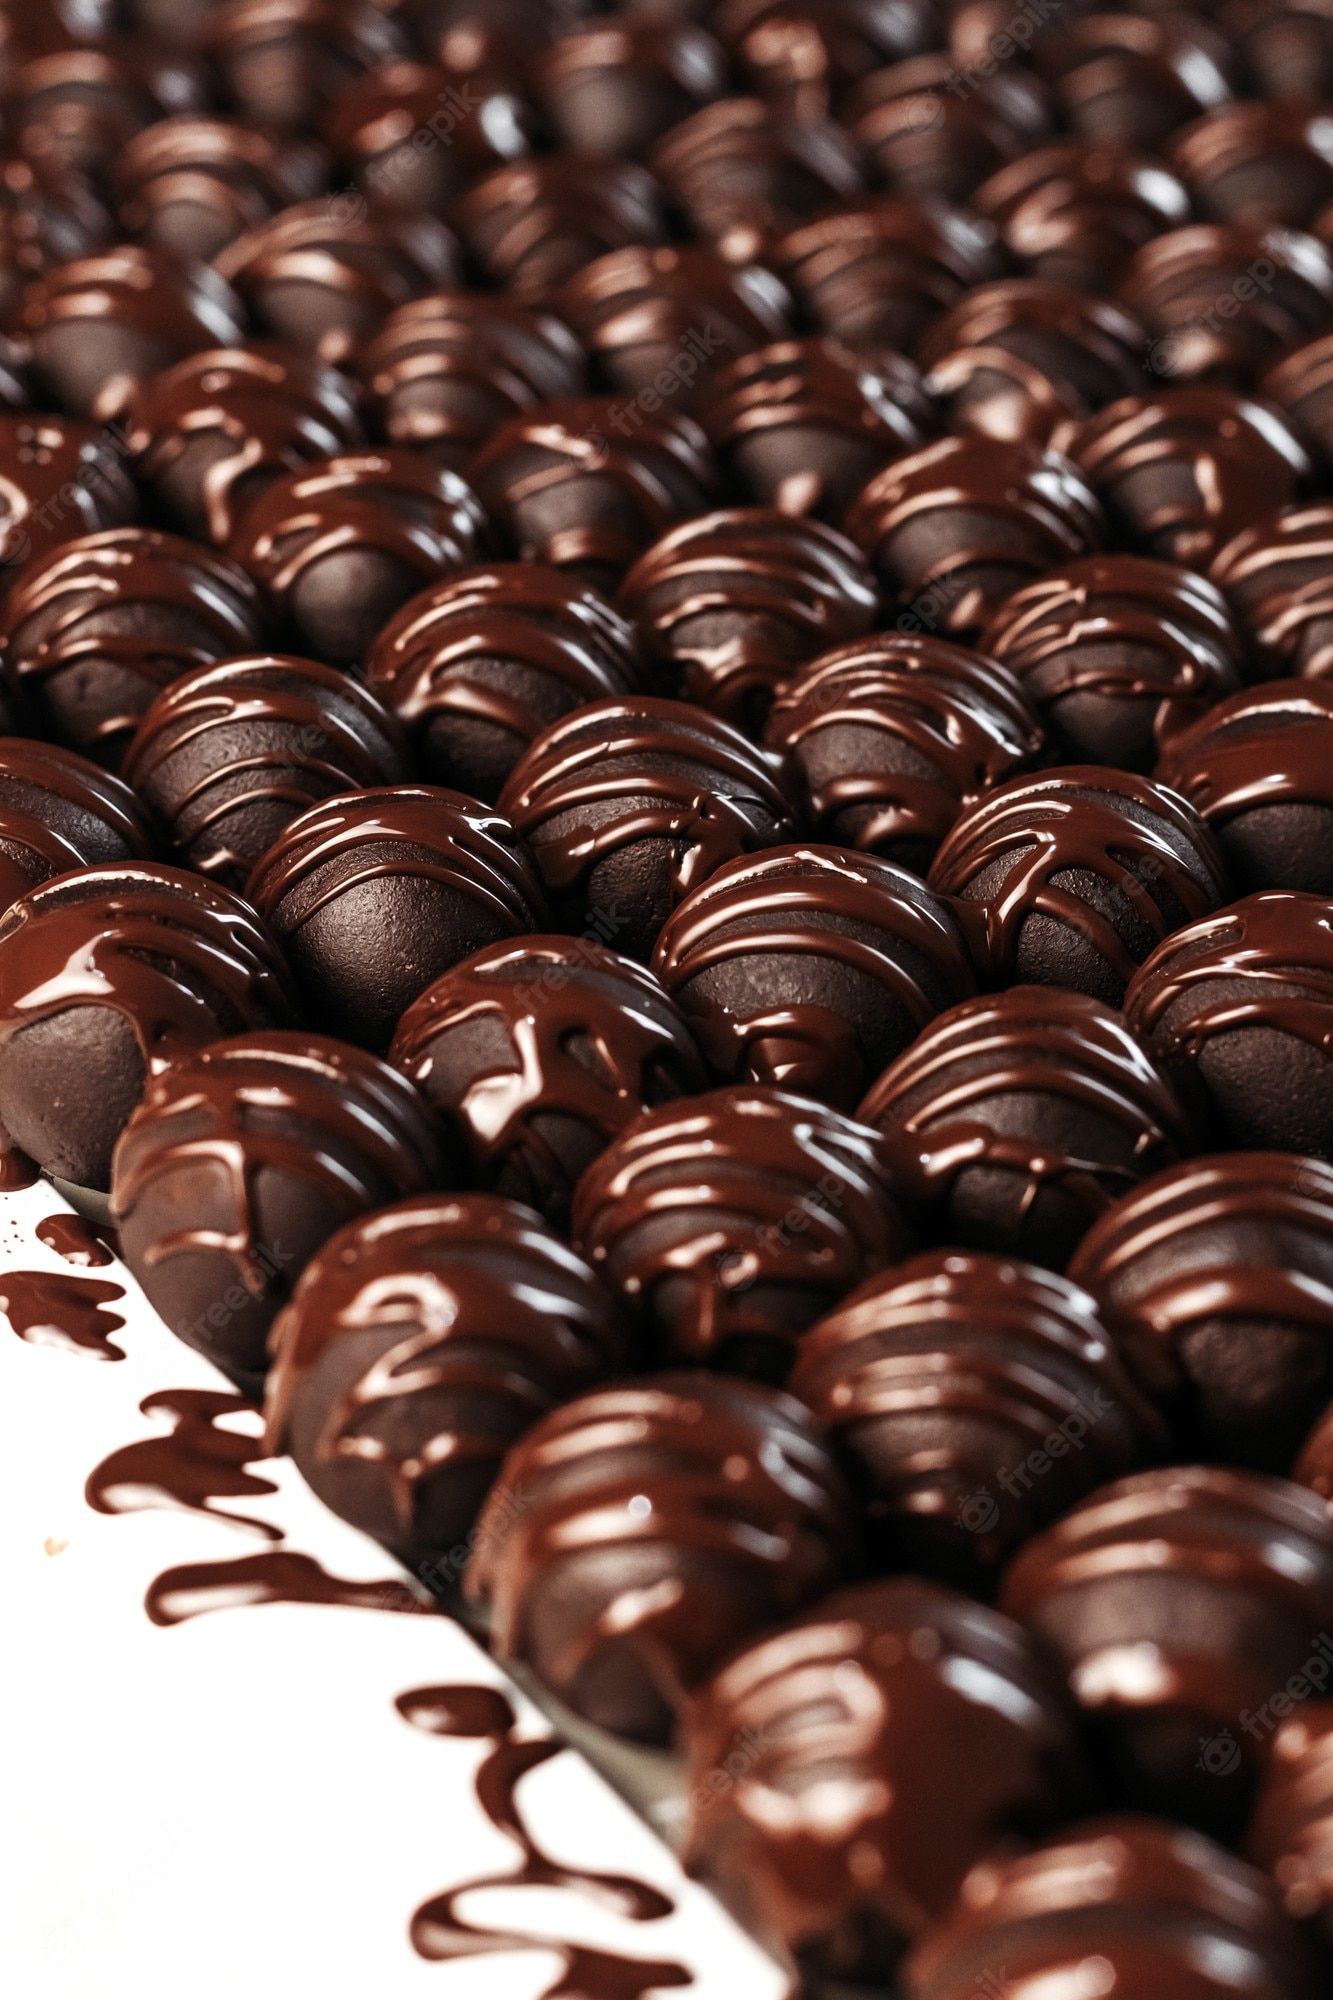 A tray of chocolate truffles with some coated in chocolate sauce. - Candy, chocolate